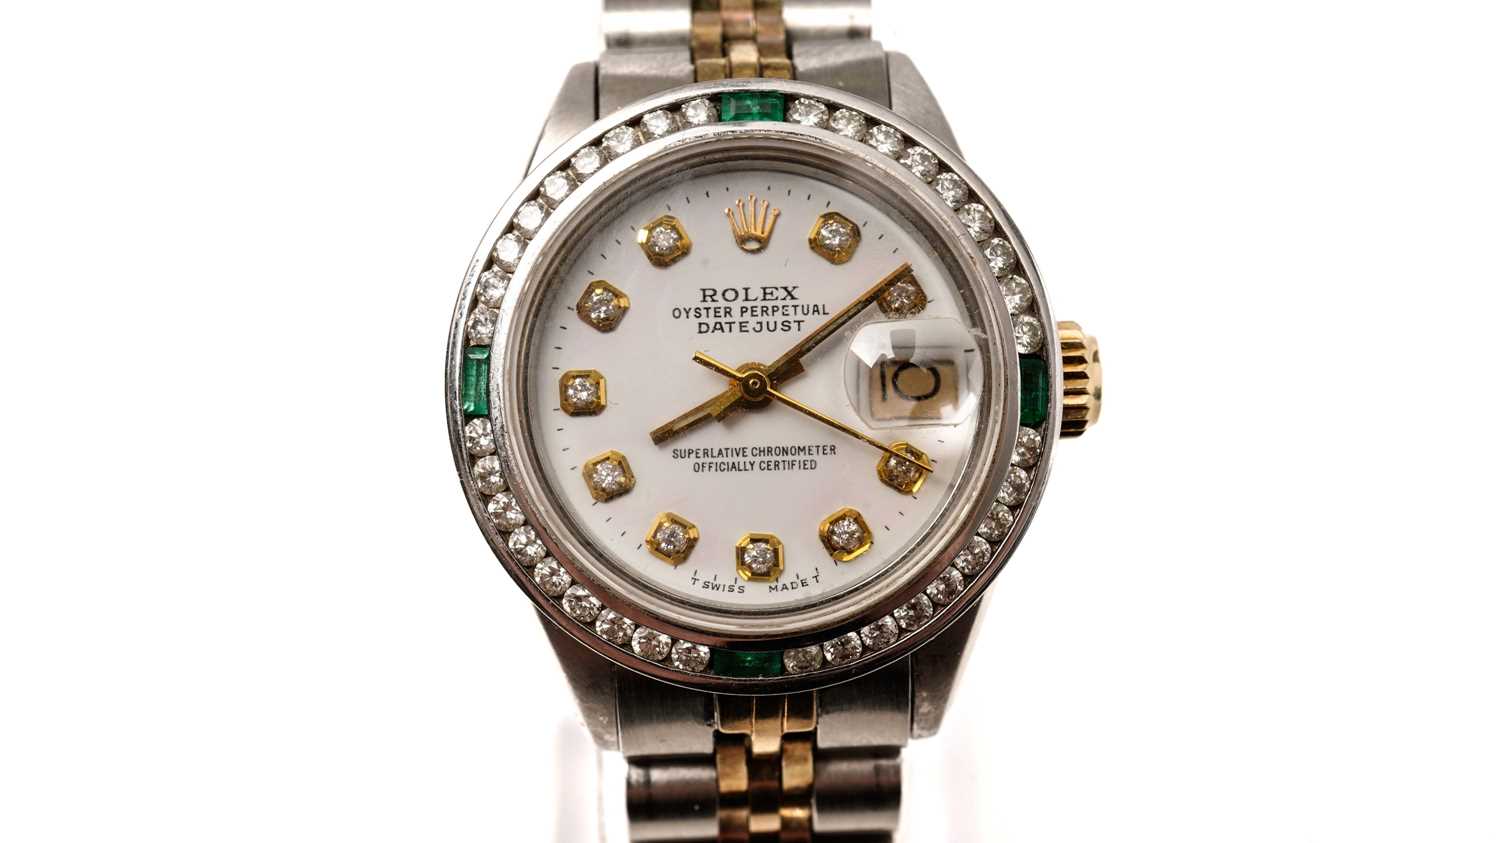 Lot 1043 - Rolex Oyster Perpetual Datejust: a stainless steel cased automatic wristwatch